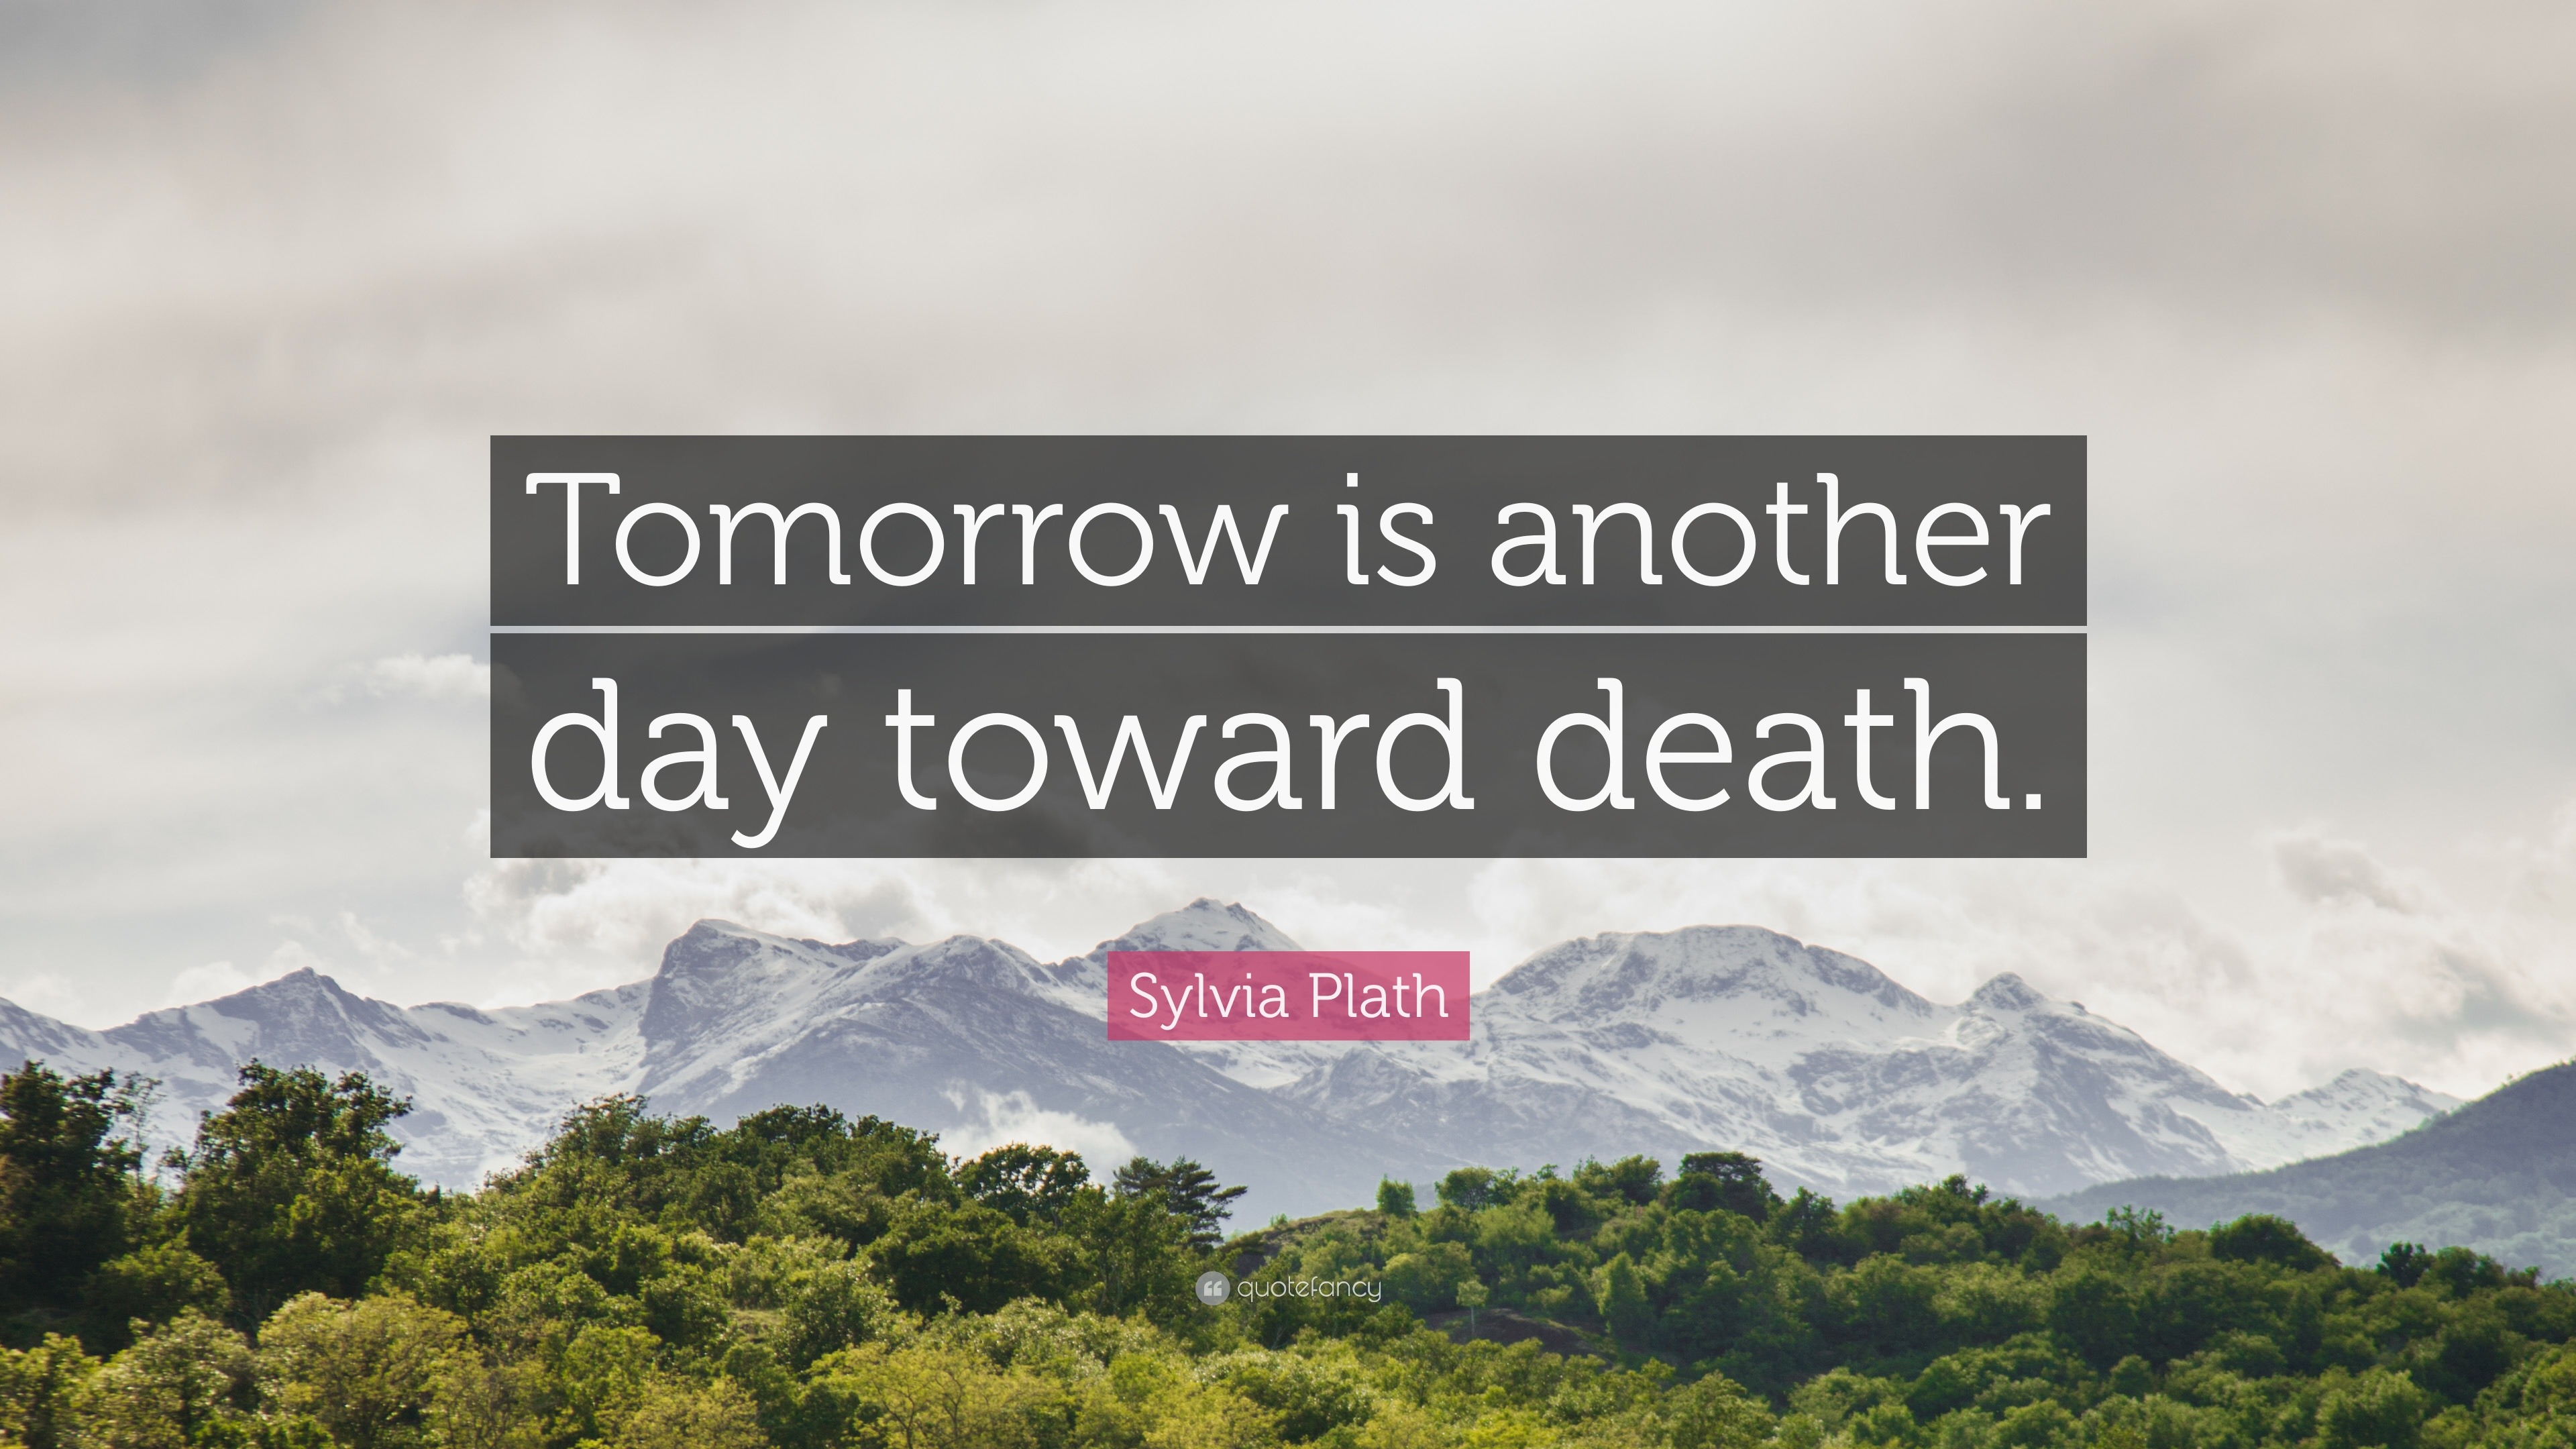 Sylvia Plath Quote: “Tomorrow is another day toward death.”